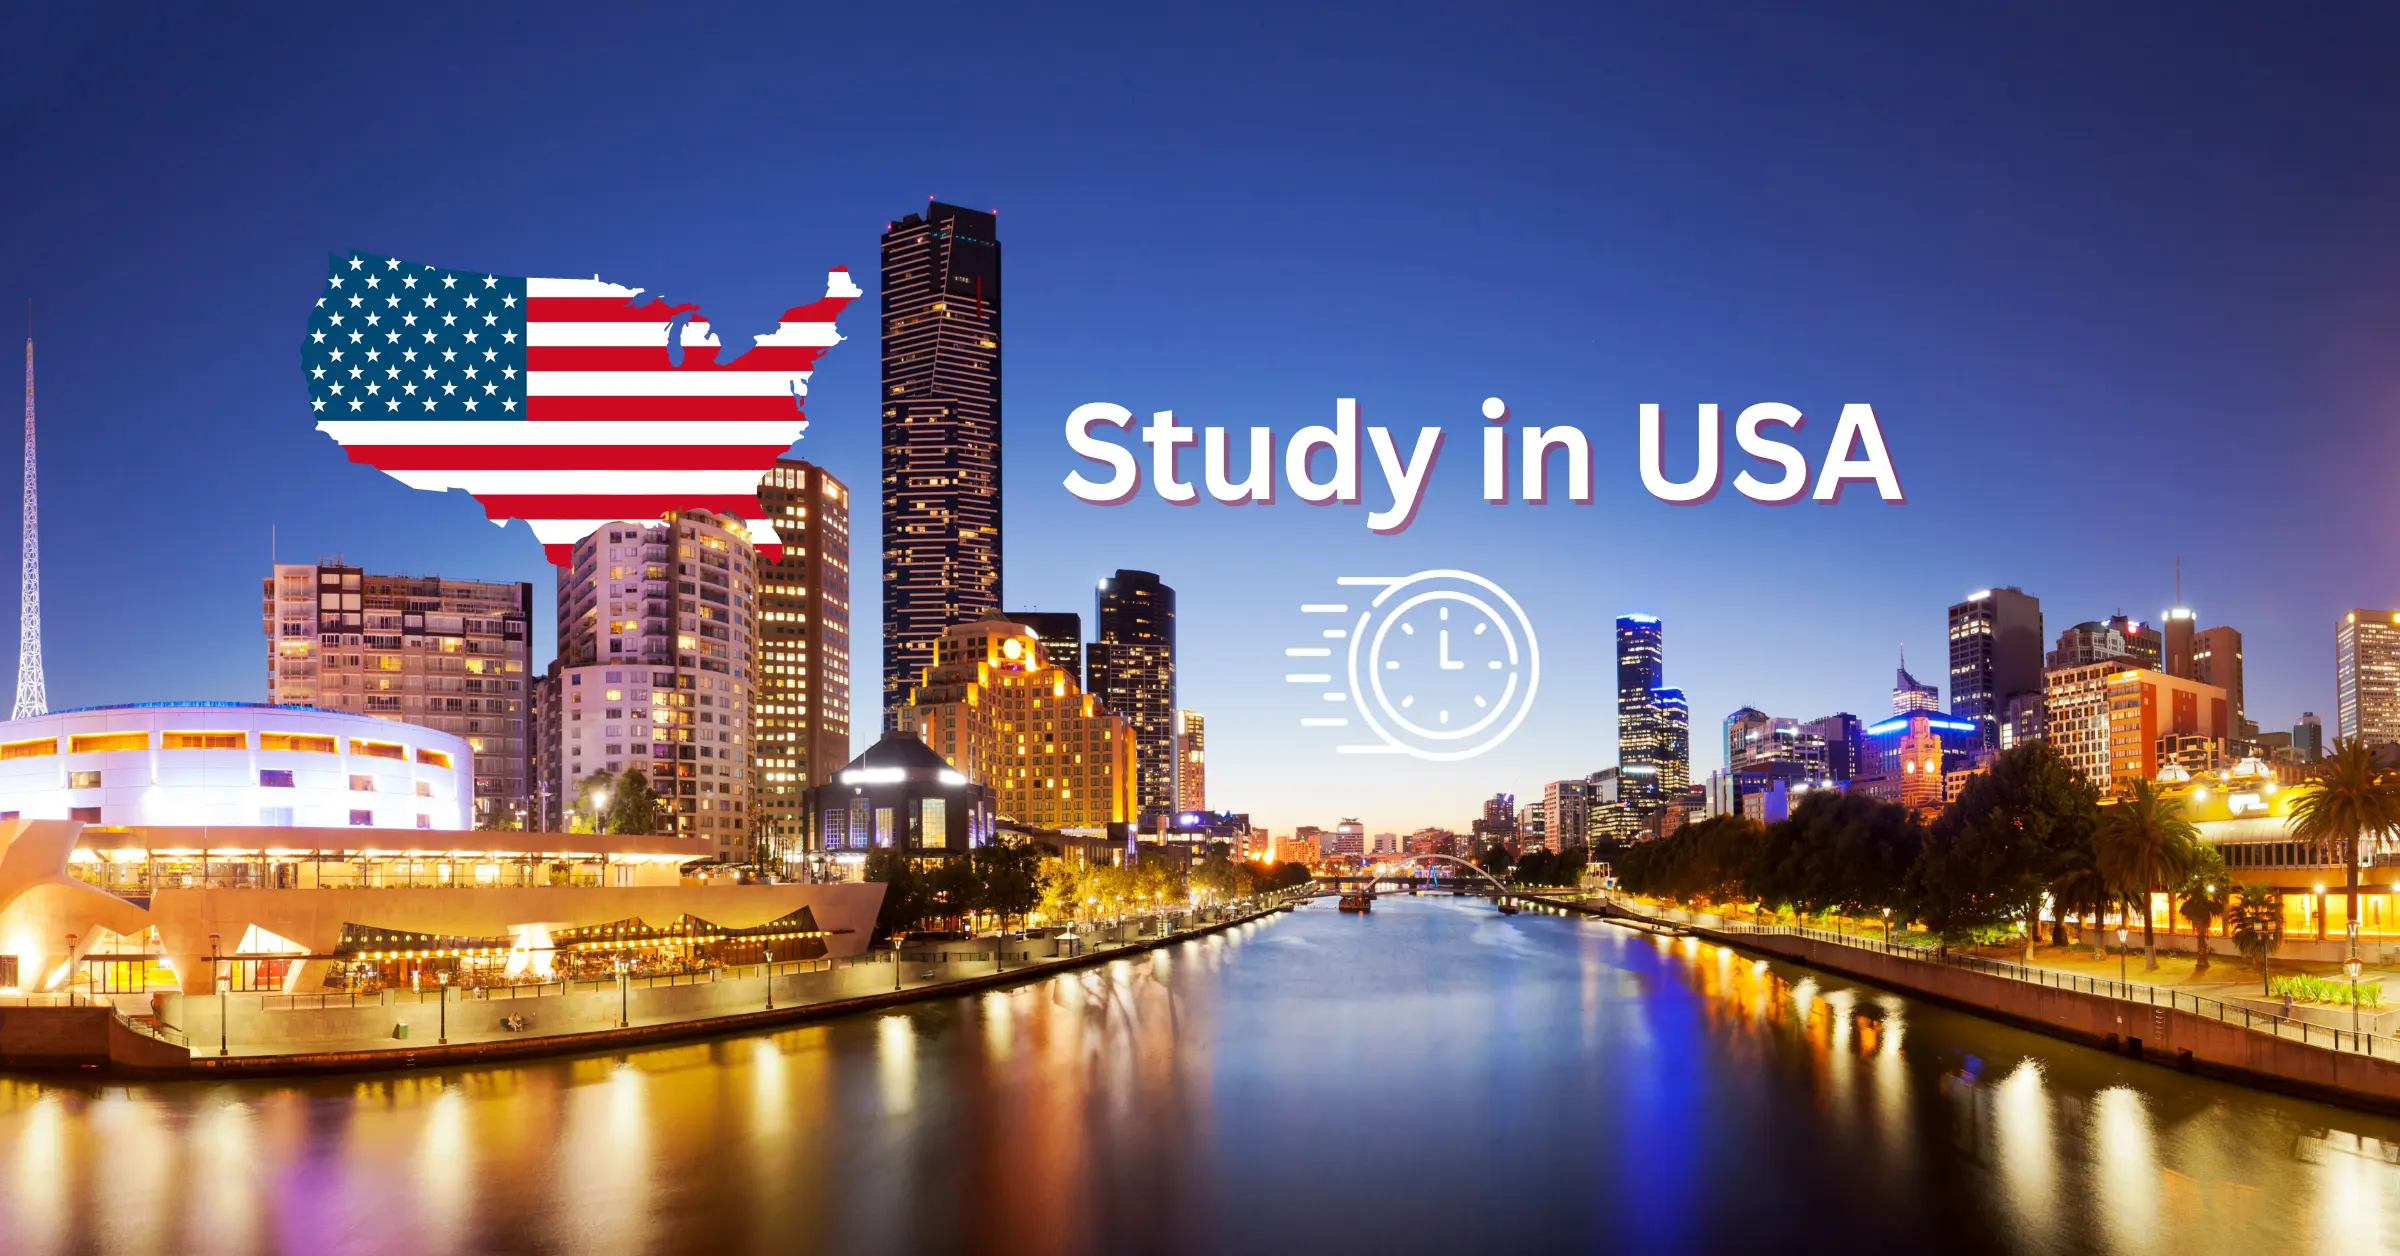 Study in USA - USA Education Consultants - USA Education Consultants in  Hyderabad, Kodad and Khammam